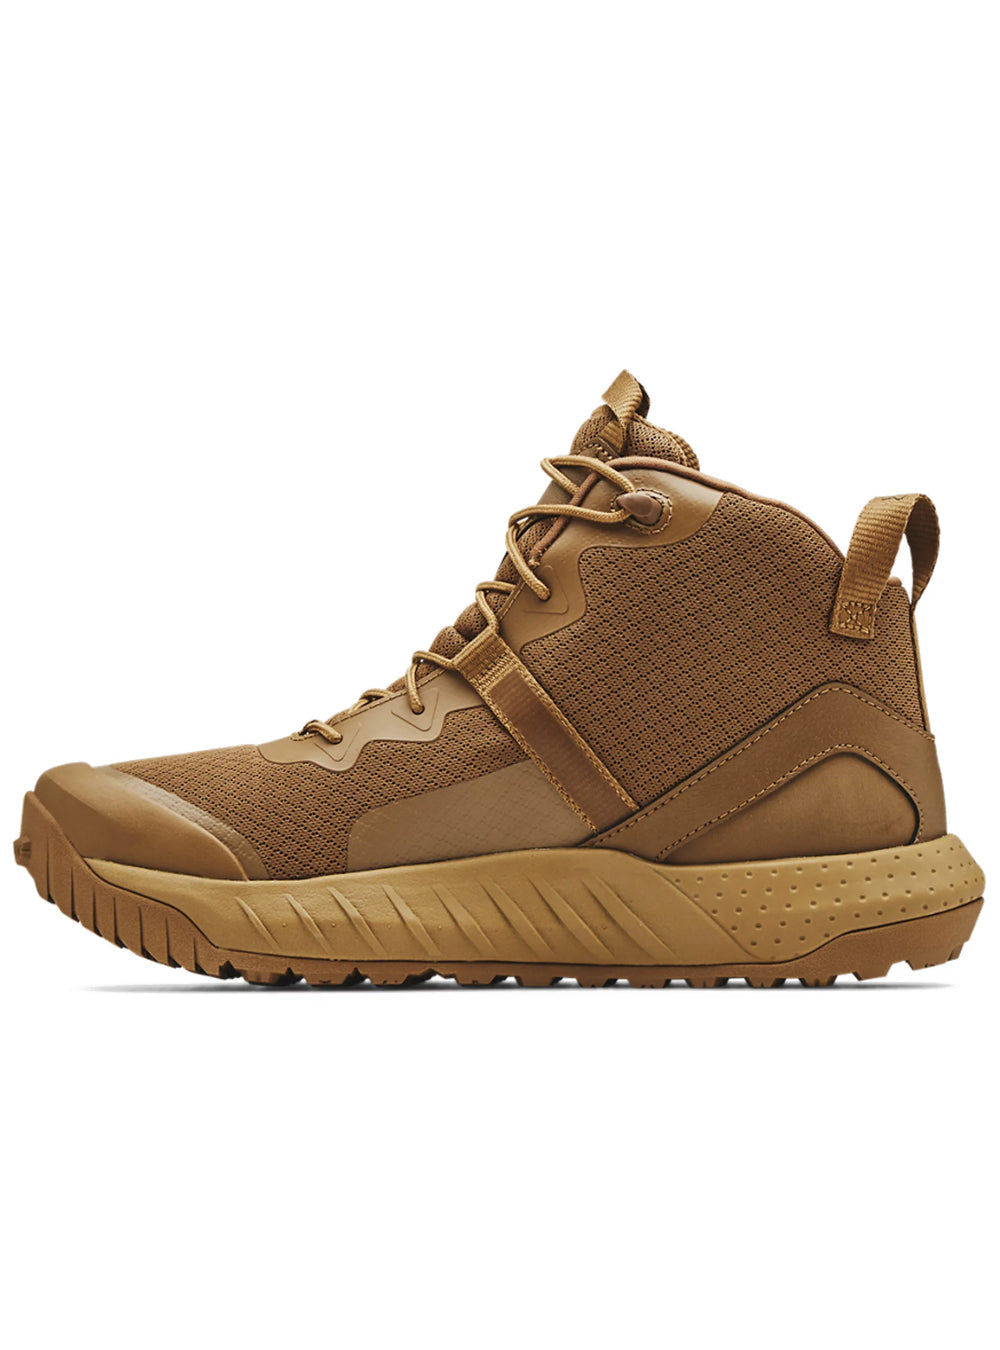 Under Armour Micro G Valsetz Mid - Coyote - TacSource